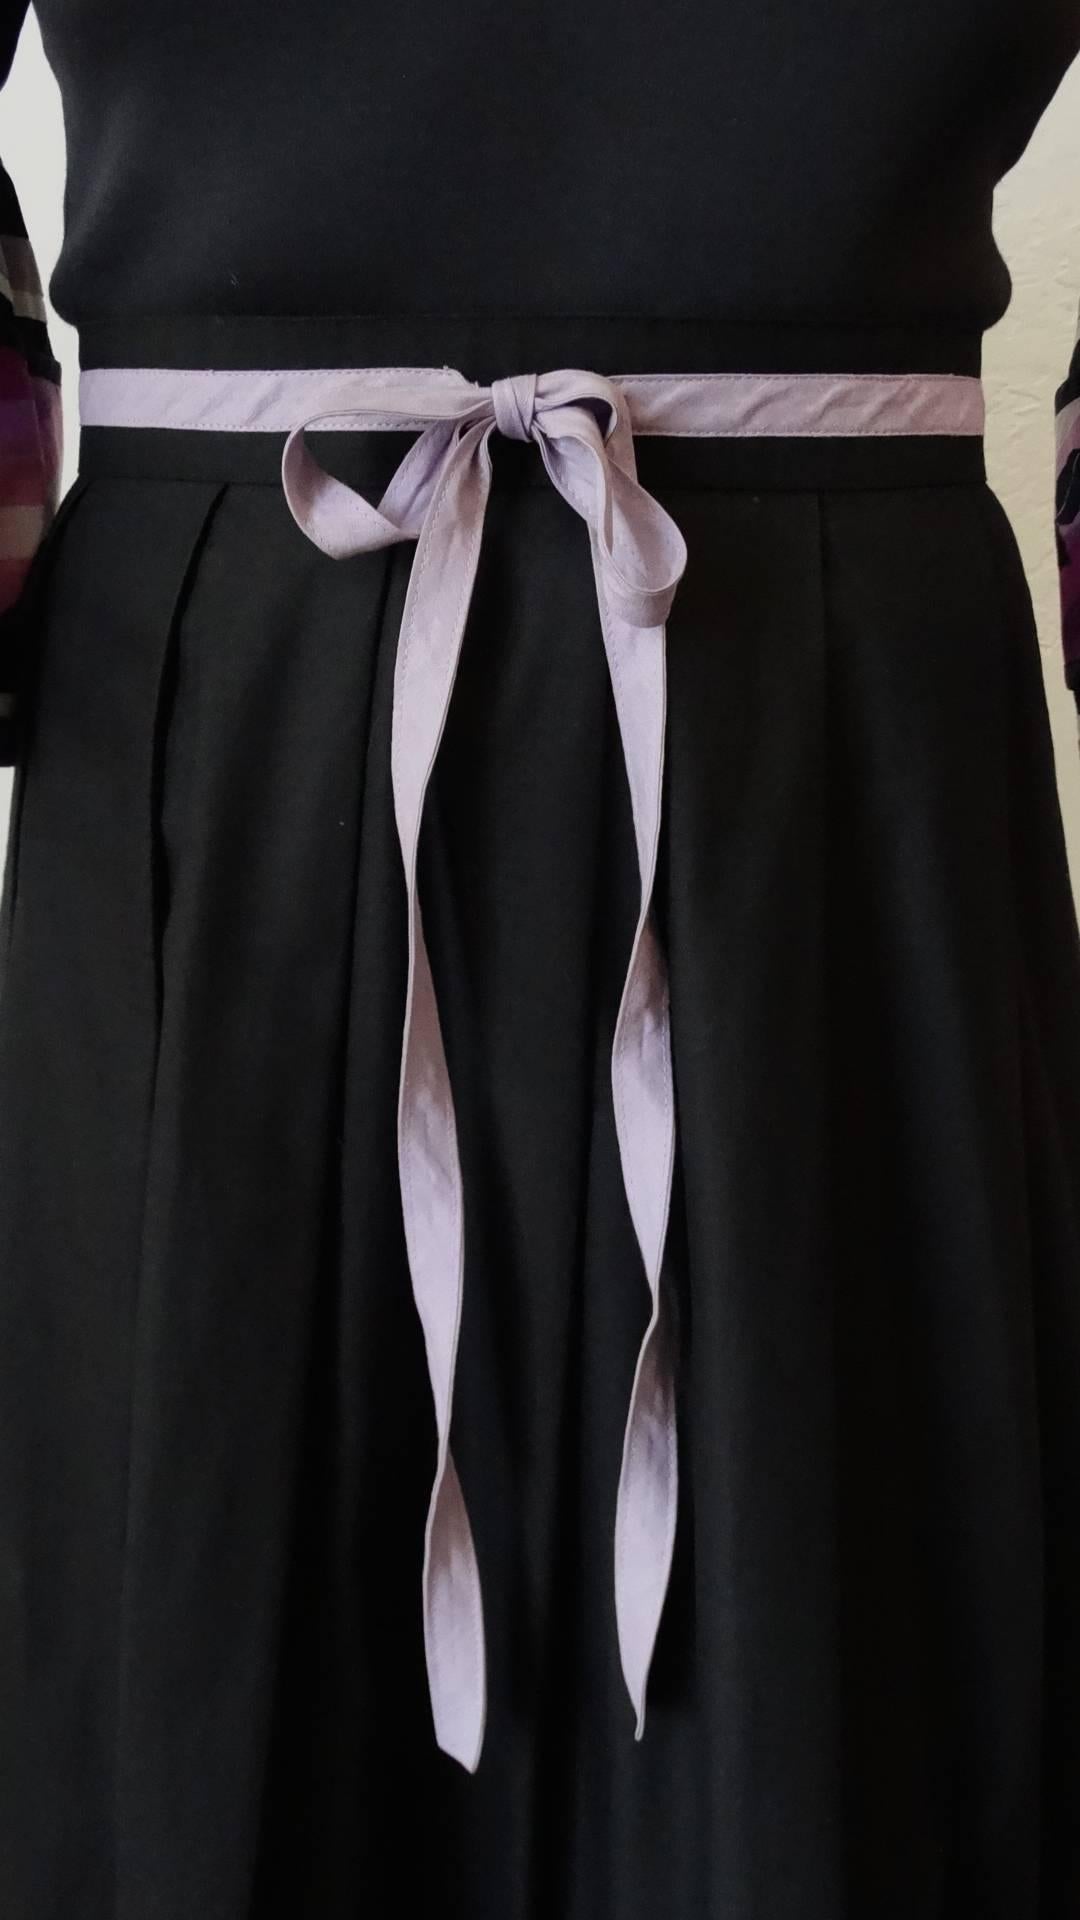 Incredible late 1970s-1980s Yves Saint Laurent Rive Gauche maxi dress! Solid black fabric contrasted with lavender and purple striped details along the hem and sleeves. Adorable bell sleeves that flare out at the cuffs. Lavender bow around the